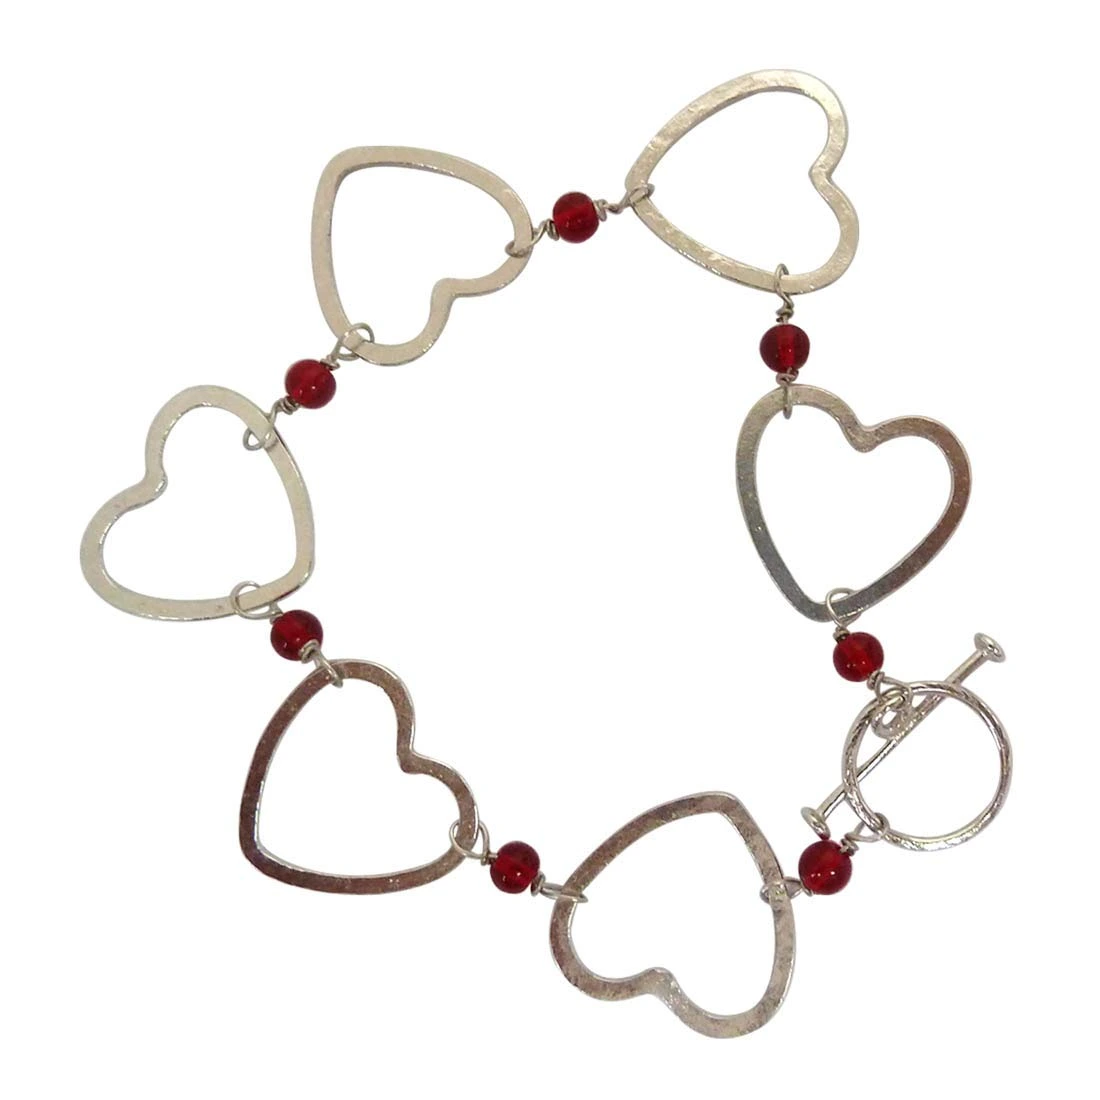 Modern & Stylish Silver Plated Heart Shape with Red Beads Bracelet (SDS163)